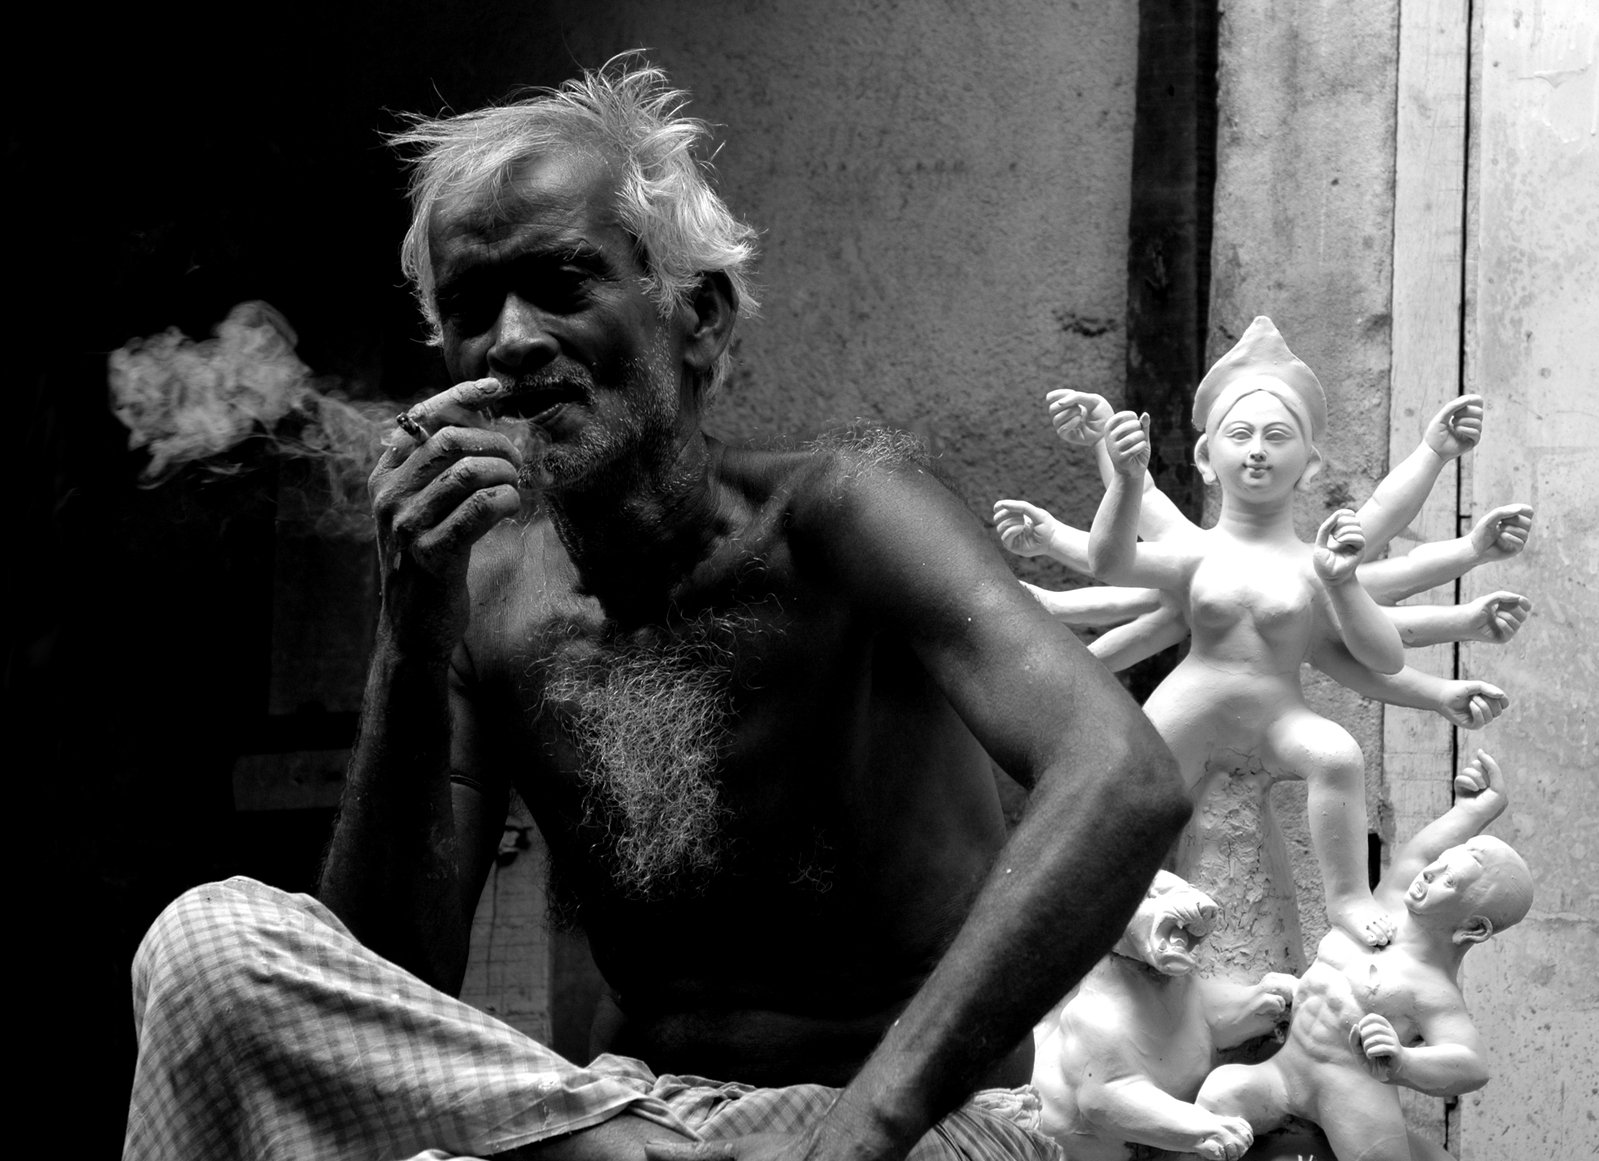 an old man poses for a picture as a small group of statues are behind him